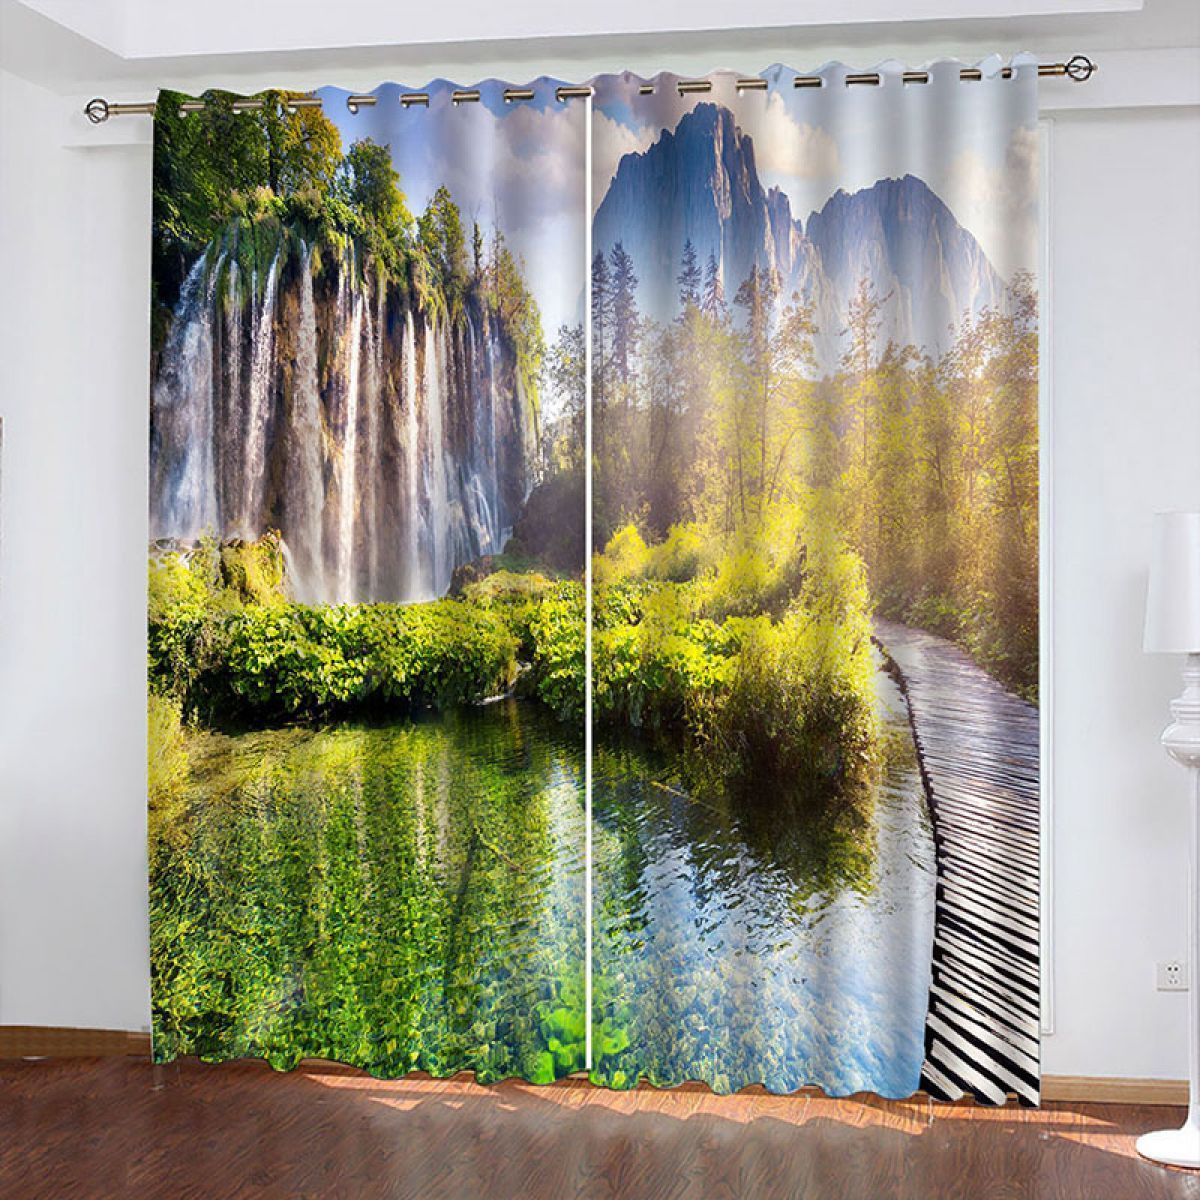 3d mountain and waterfall scenery printed window curtain home decor 2961